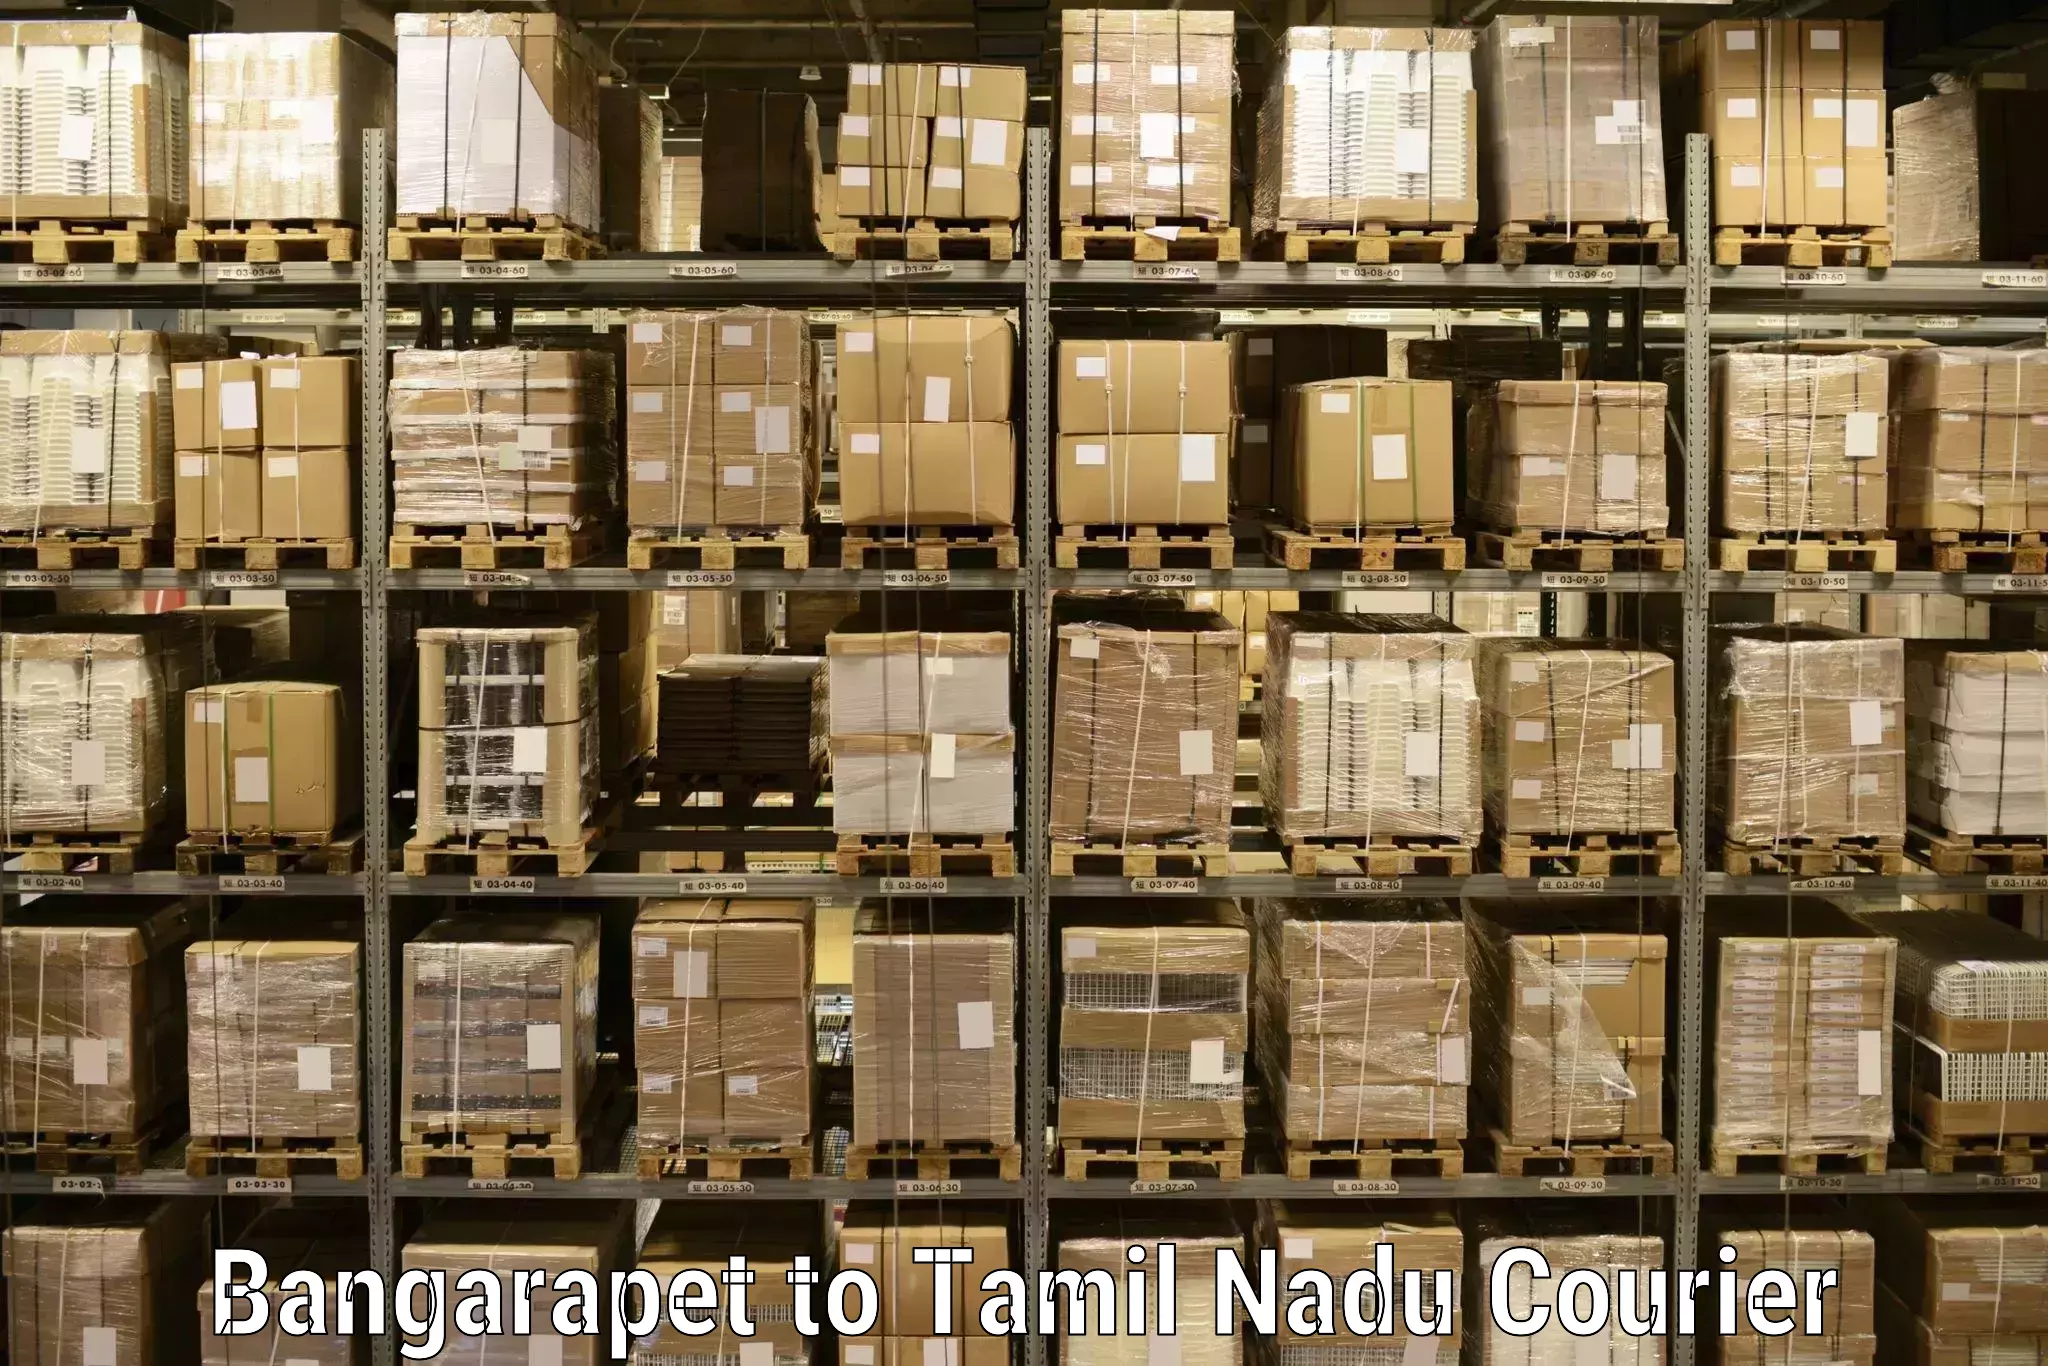 End-to-end delivery Bangarapet to Namakkal